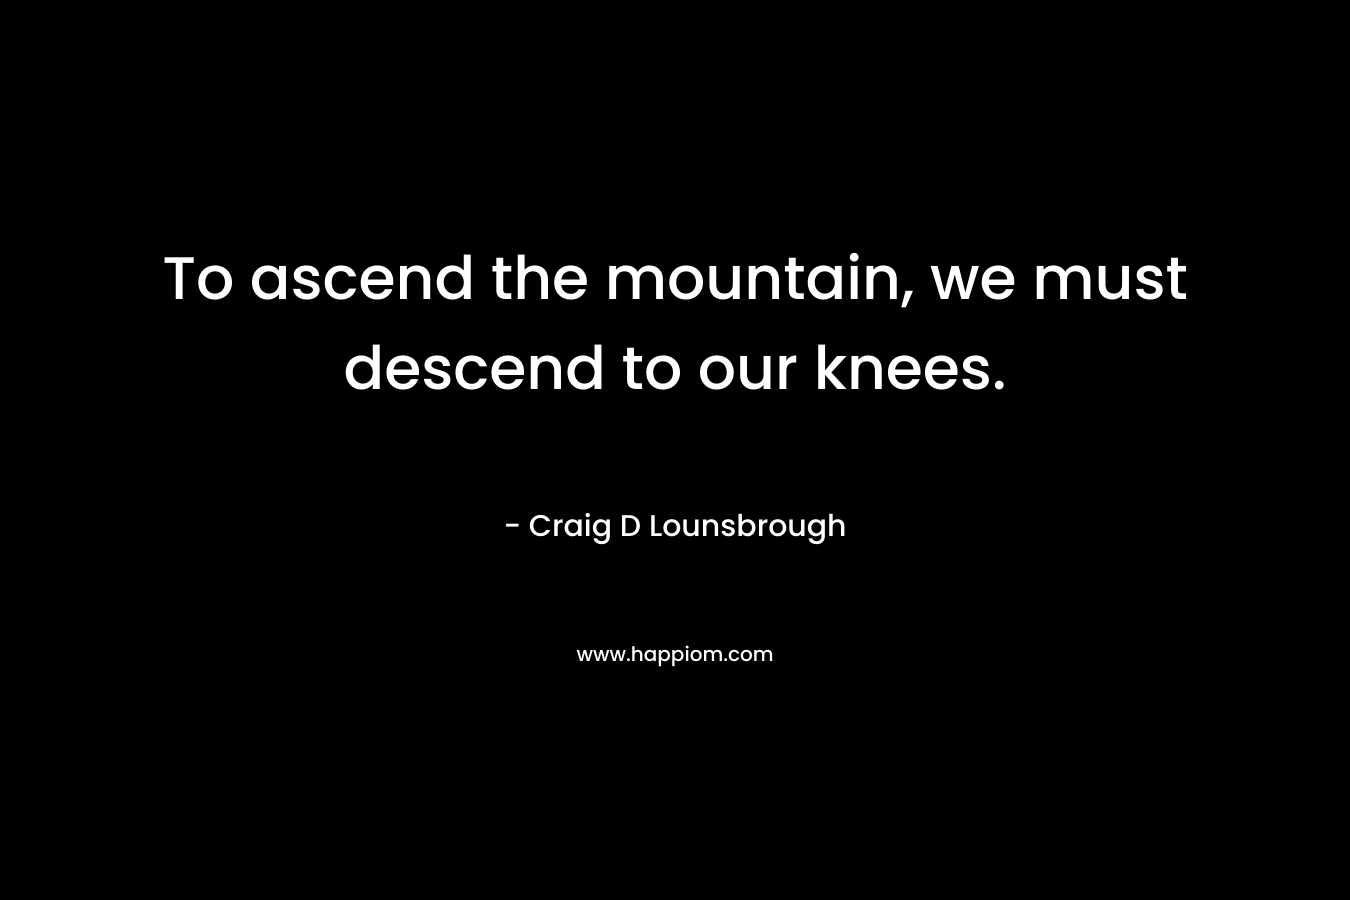 To ascend the mountain, we must descend to our knees.